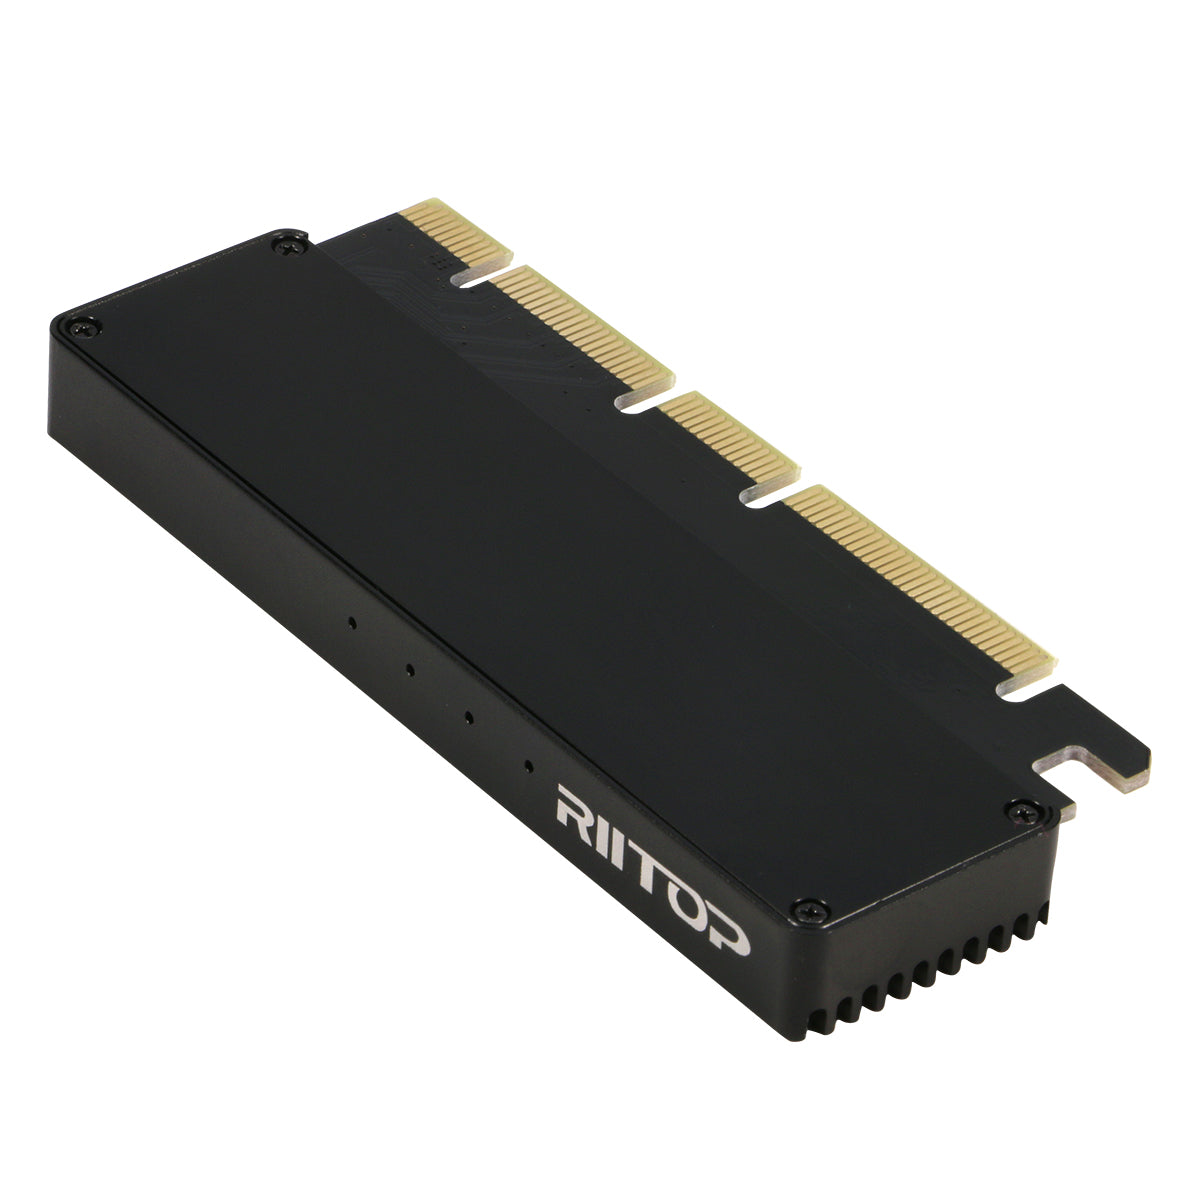 NVMe to PCIe Adapter x16, RIITOP M.2 NVMe SSD to PCI-e 3.0 x16 Adapter